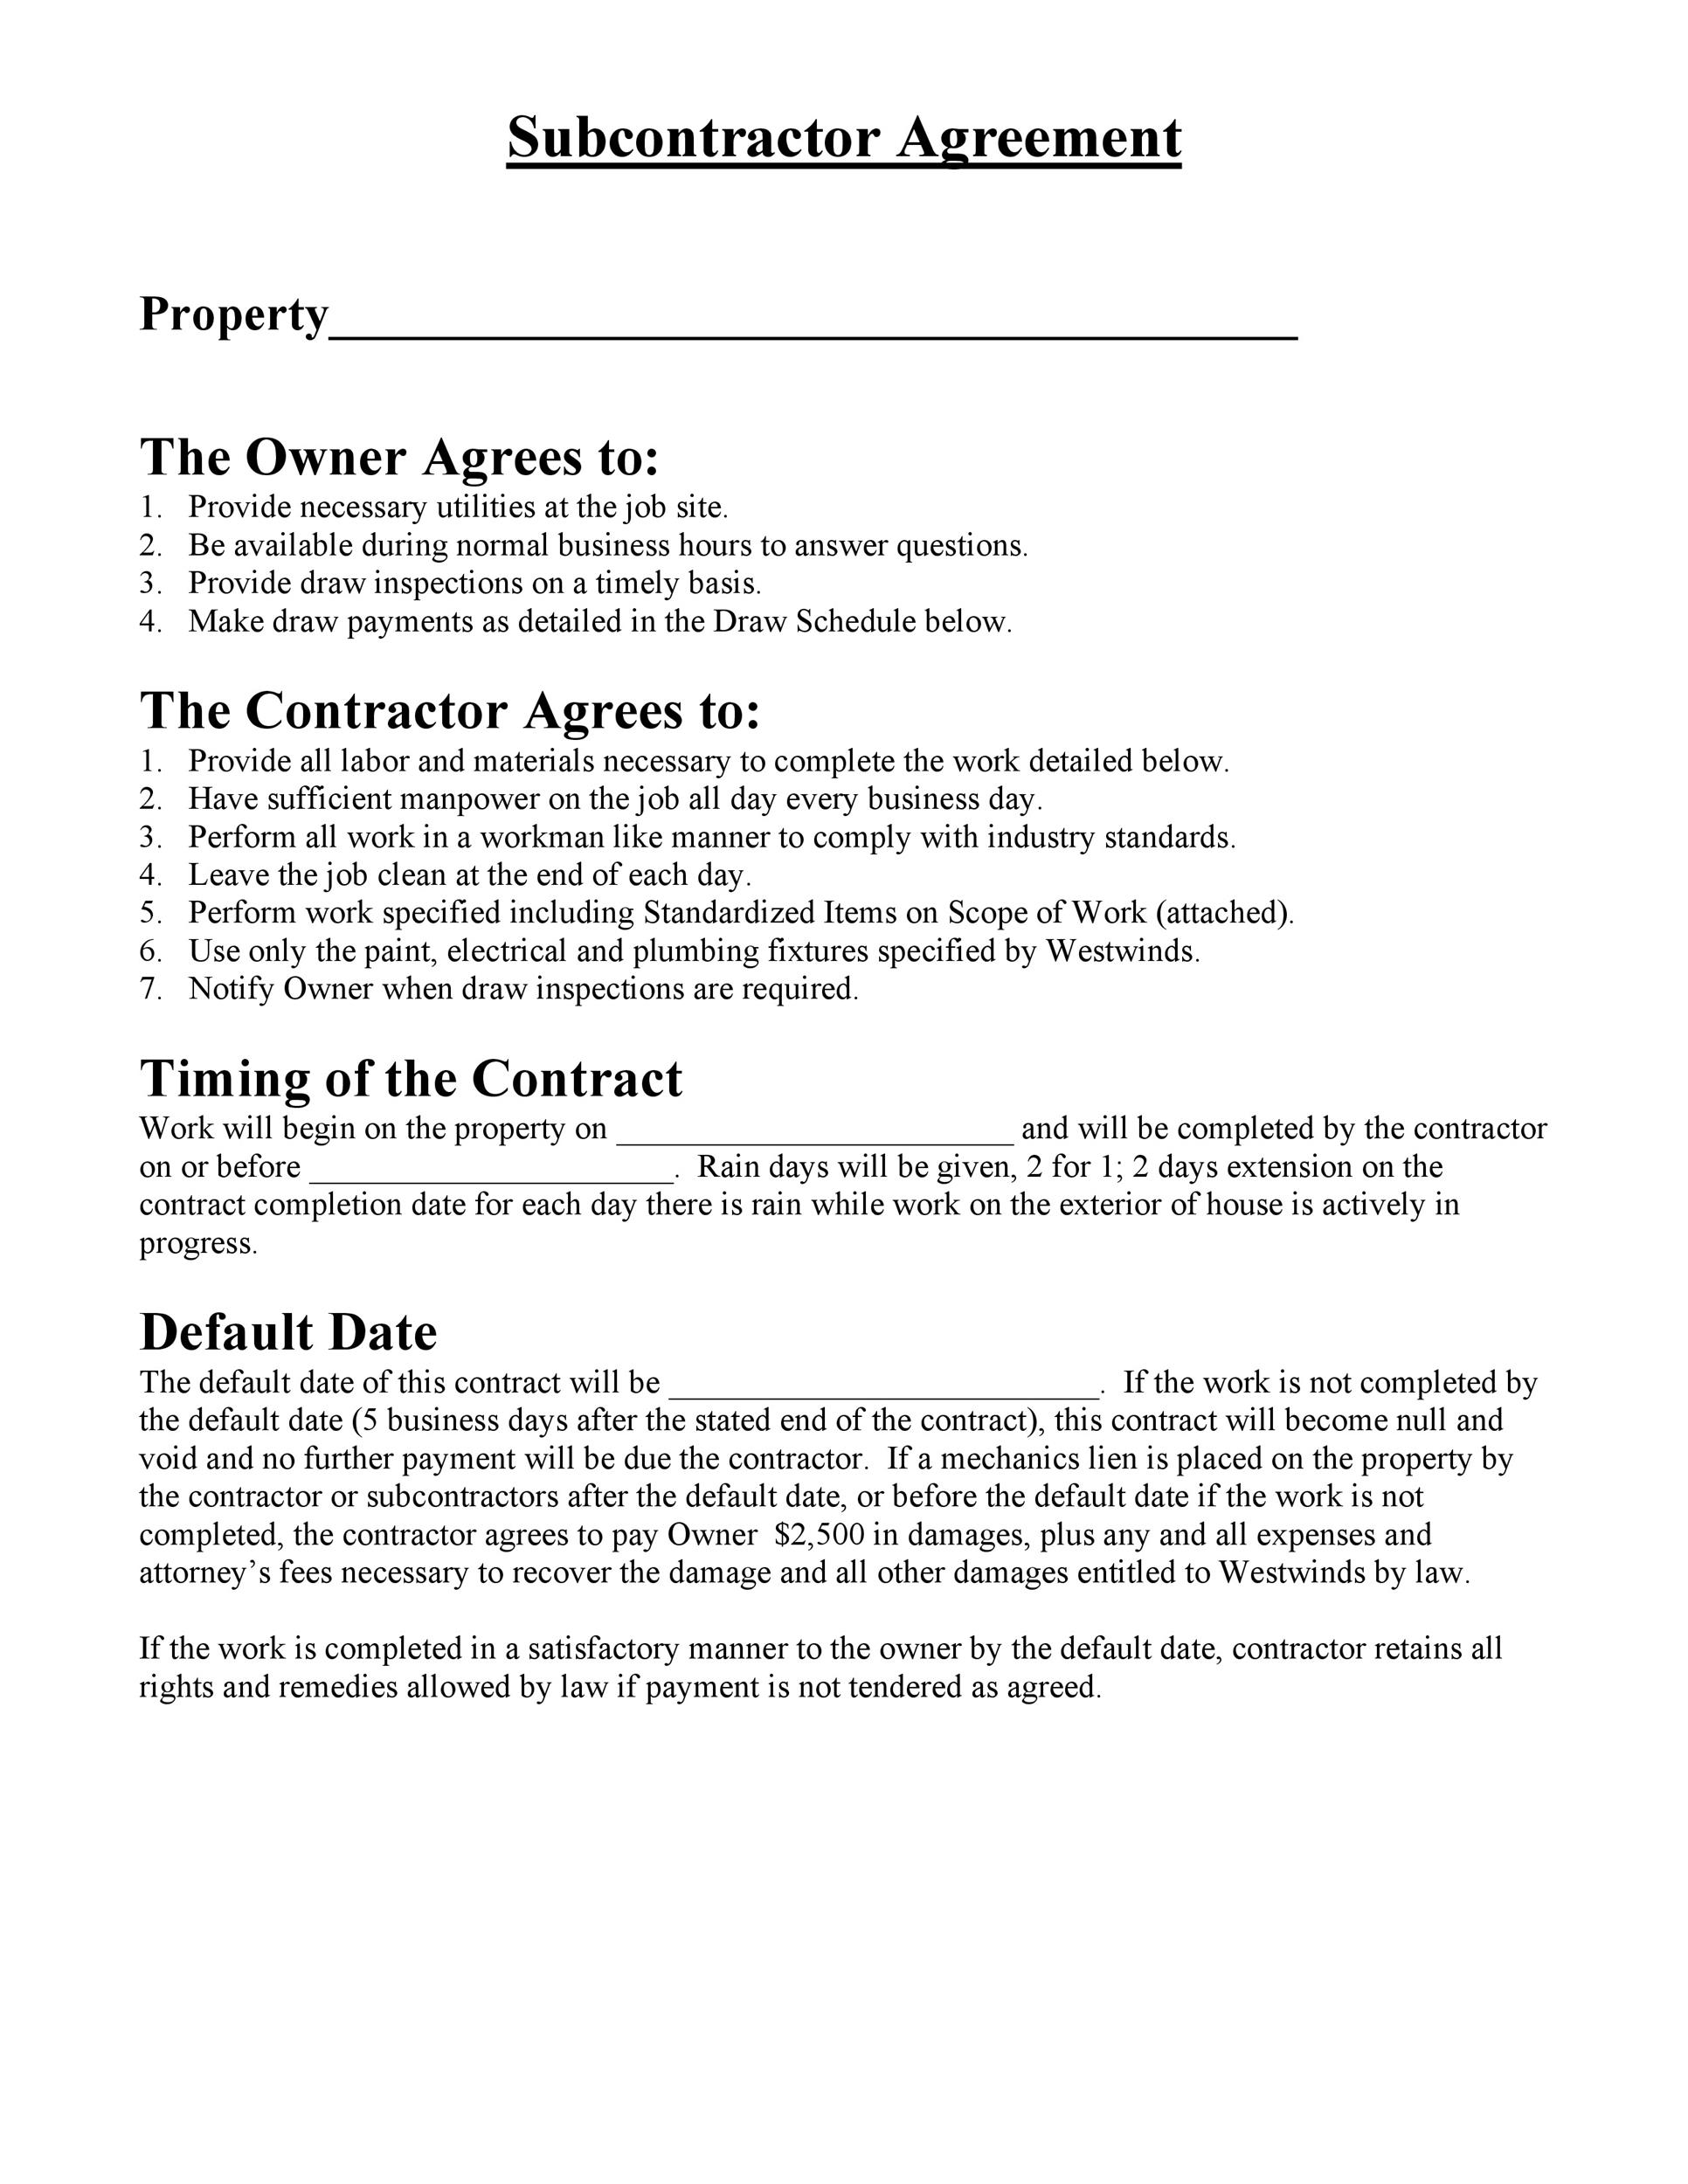 Free Subcontractor Agreement 06